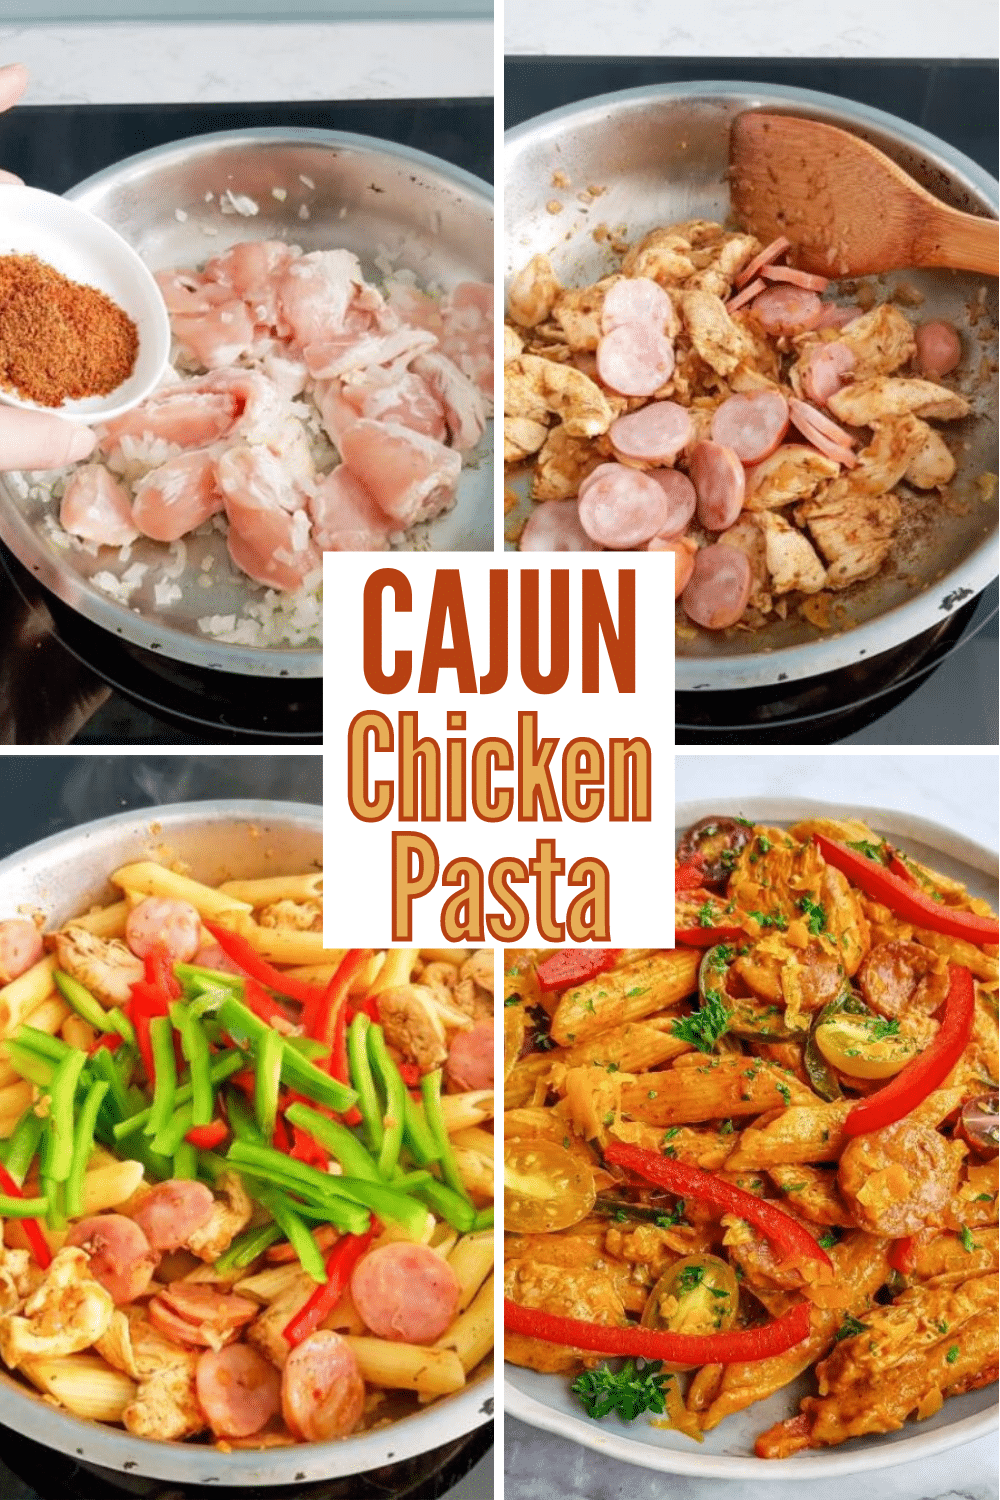 This Cajun Chicken Pasta Recipe is a flavorful, one-pan meal you can whip up in under half an hour. Perfect for busy weeknights! #cajun #chicken #pasta #onepotmeal via @wondermomwannab